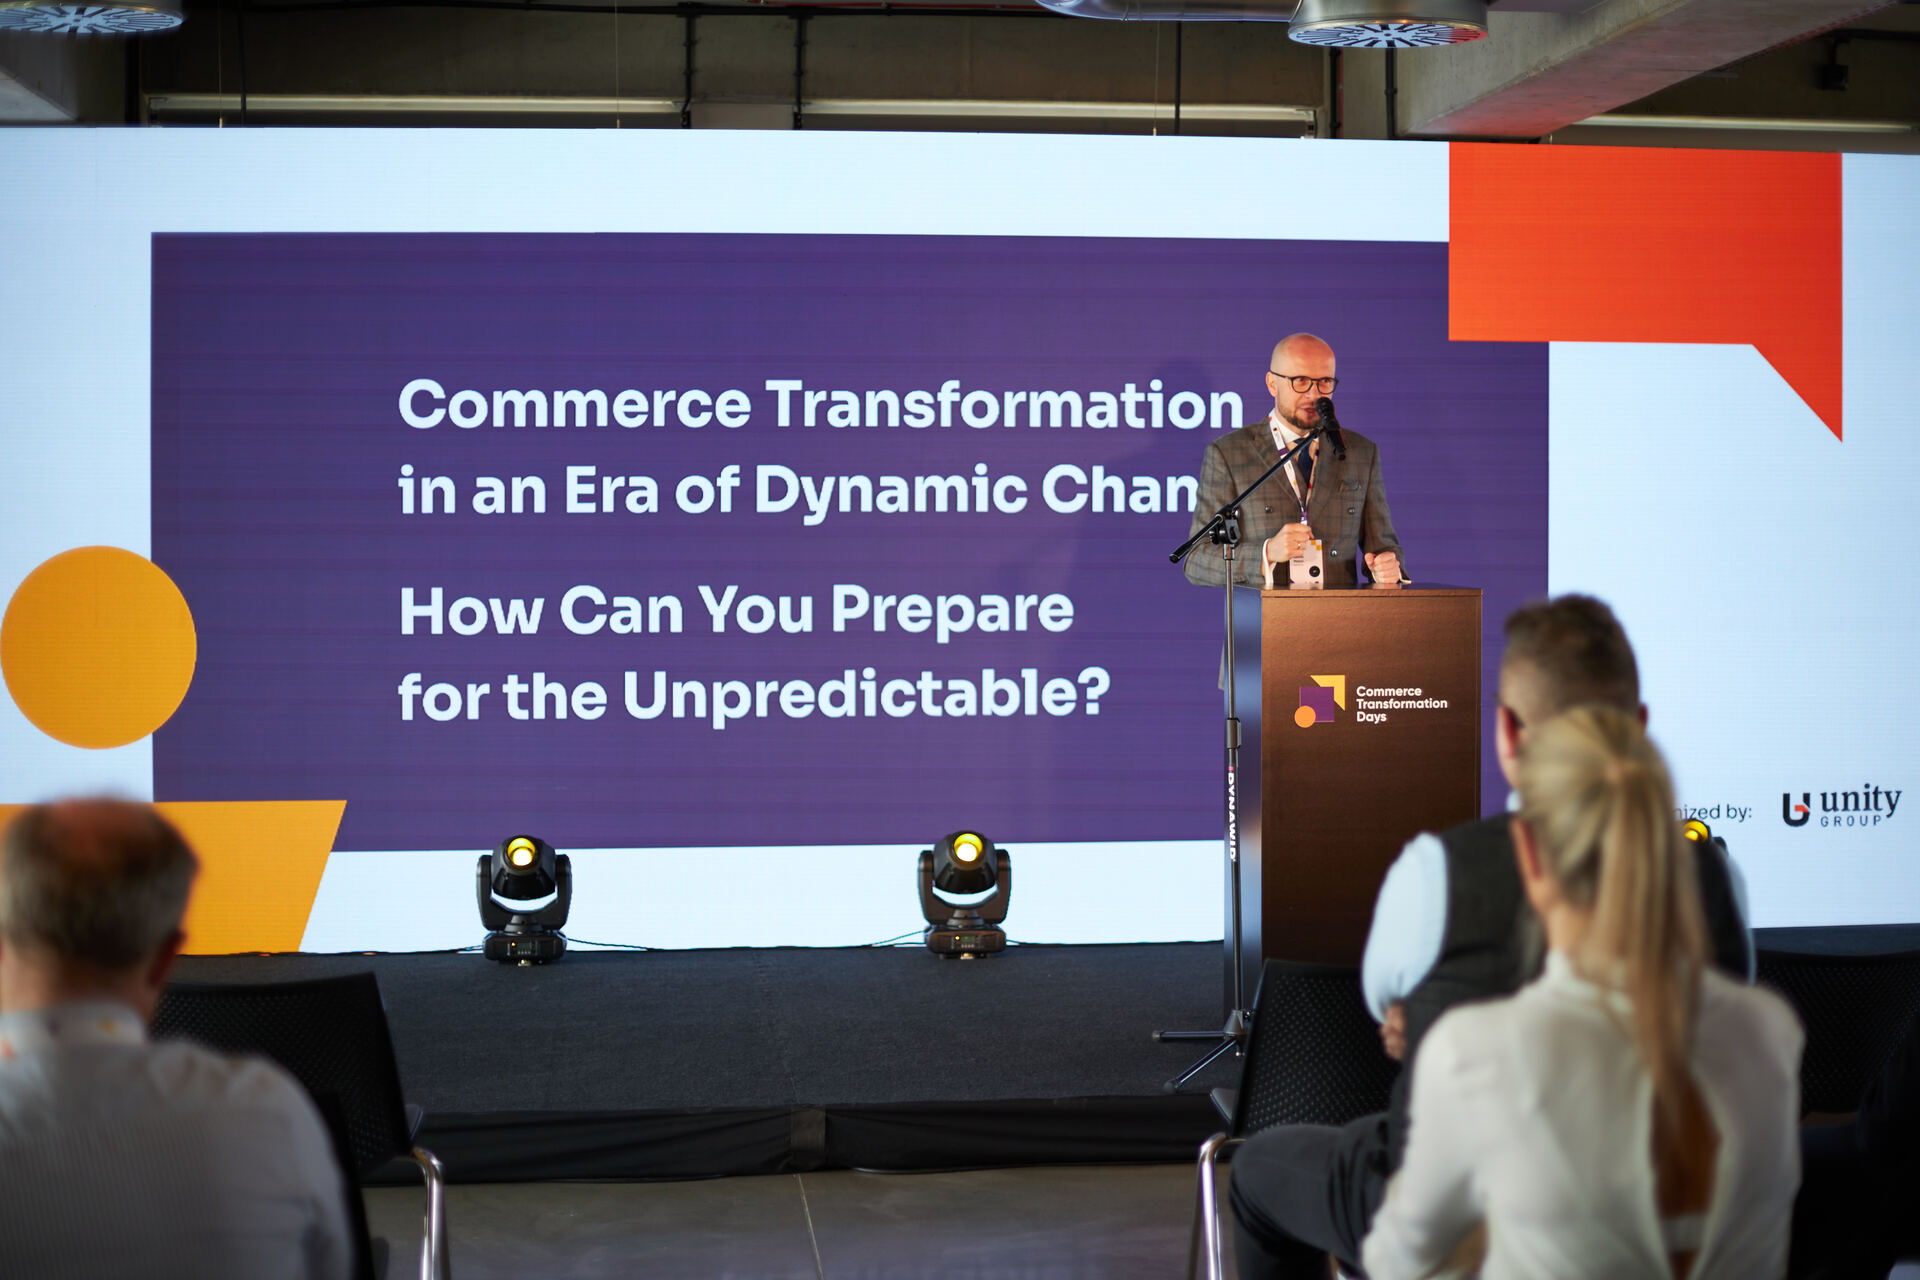 Commerce Transformation Days, or how to successfully trade online. The conference in Wroclaw is underway